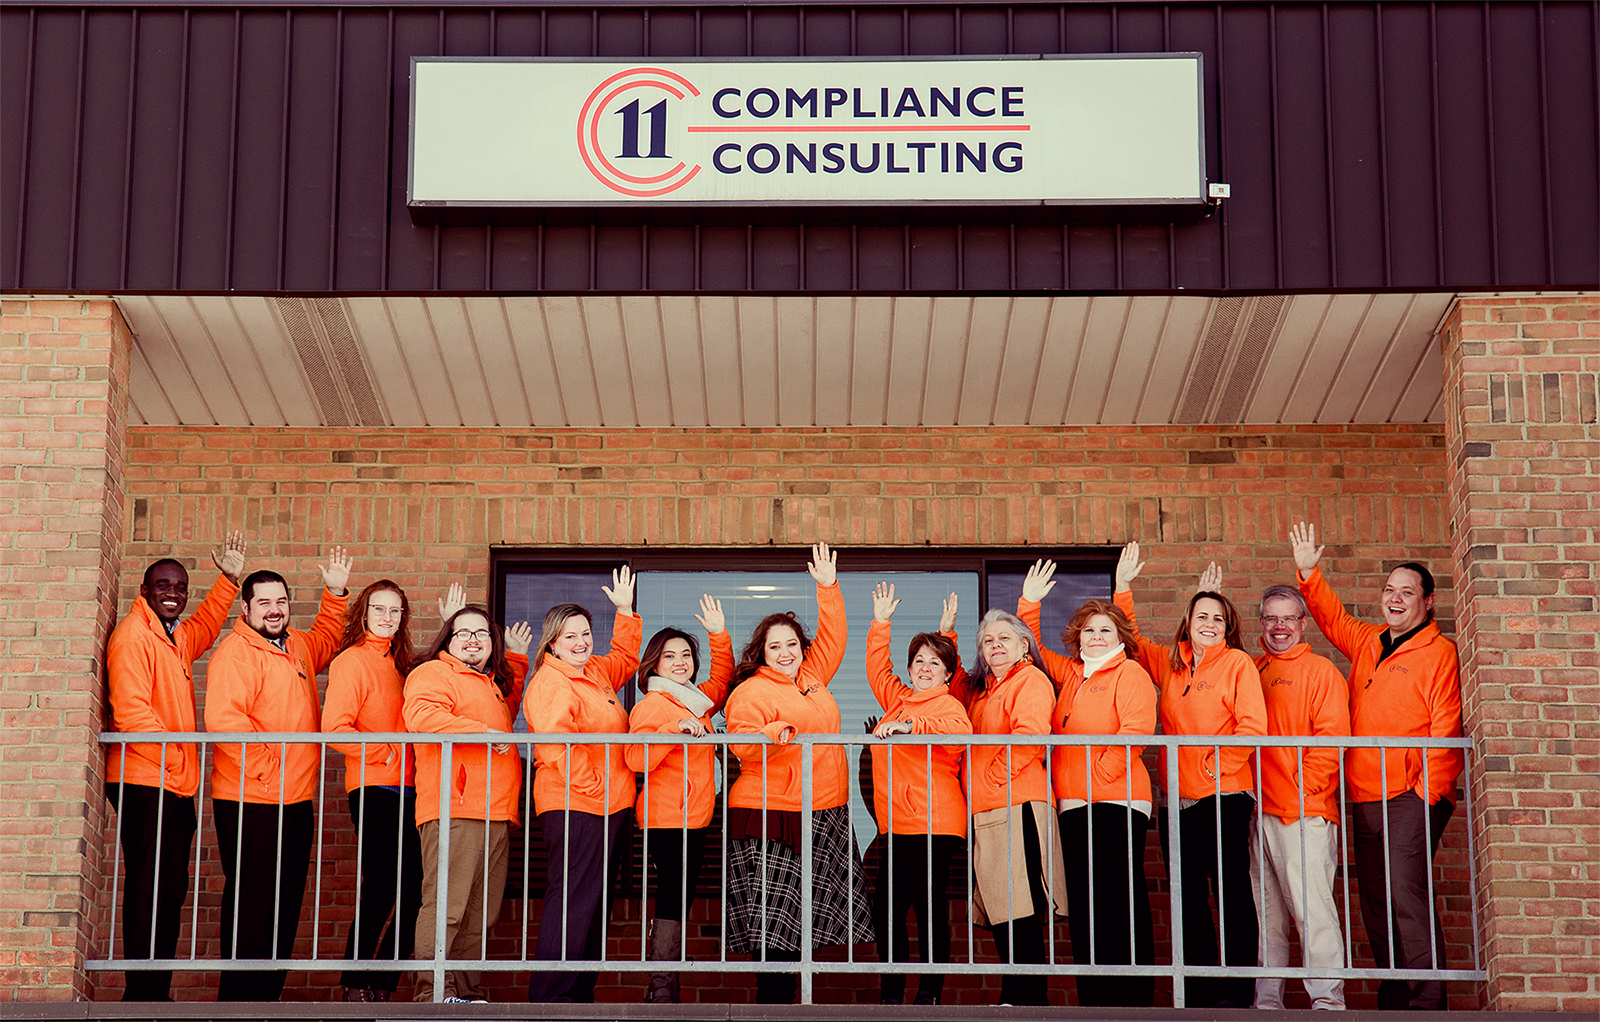 11 Compliance Consulting - Our Team Is Excited to Meet You!